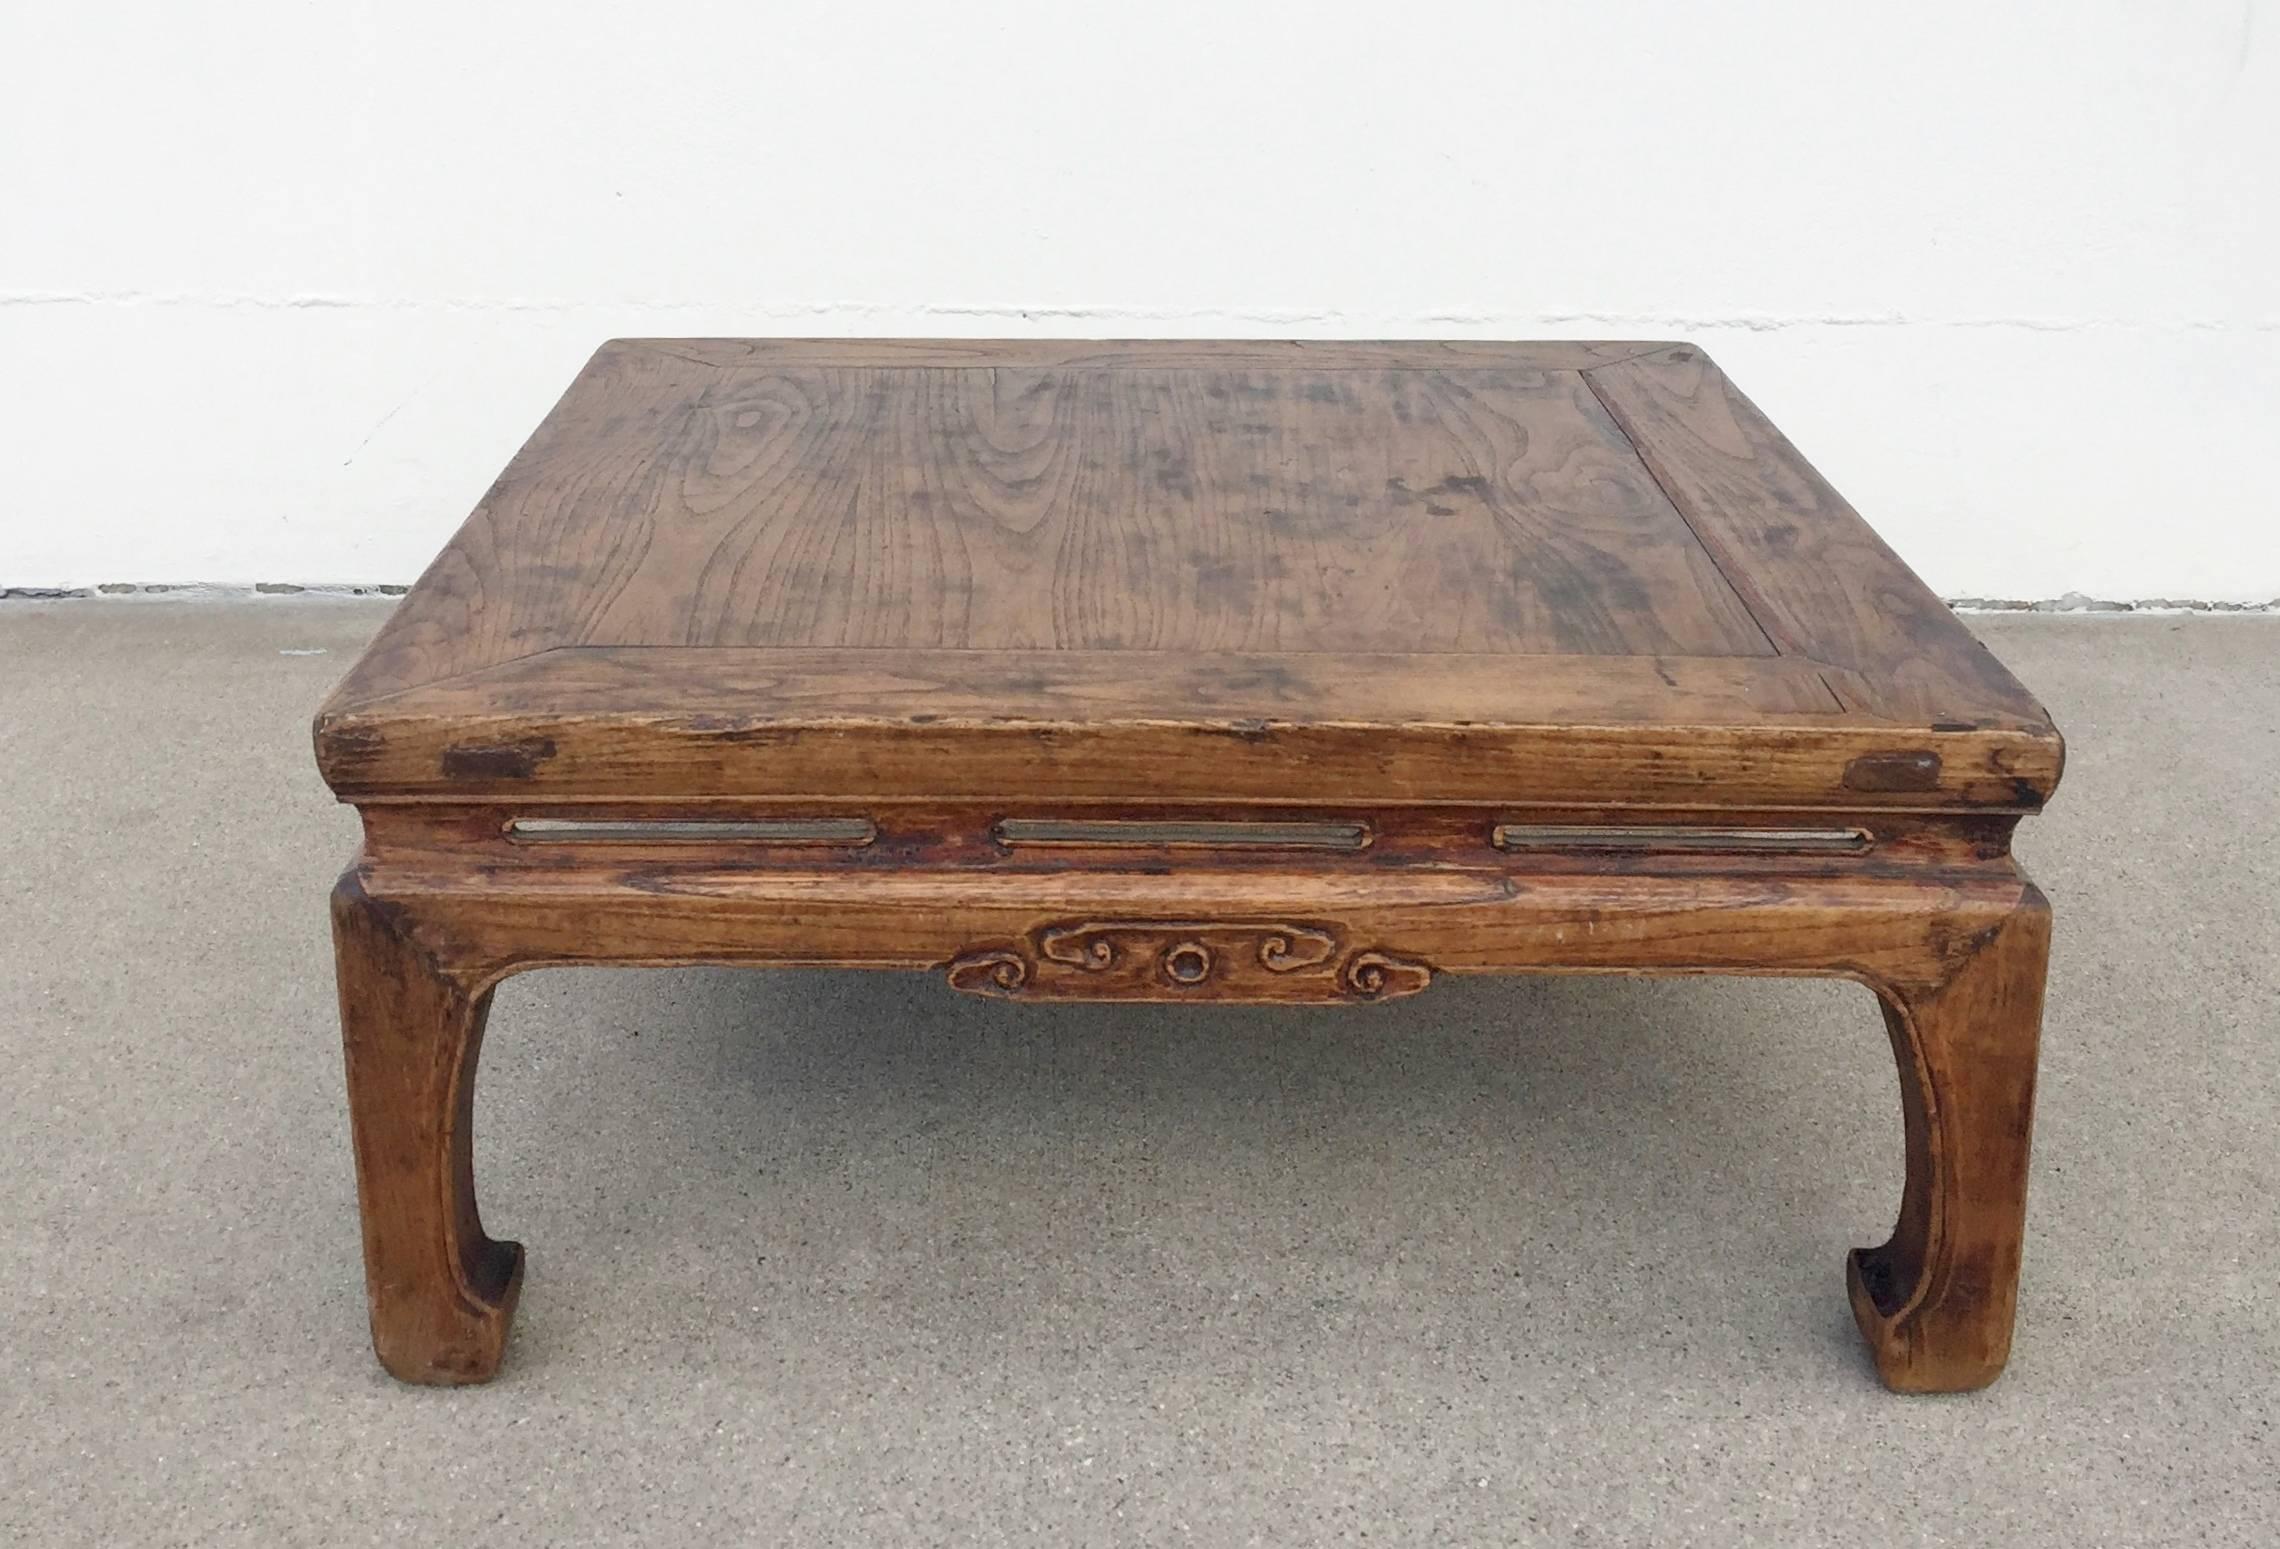 Joinery Antique Chinese Square Kang Table, Low Table For Sale